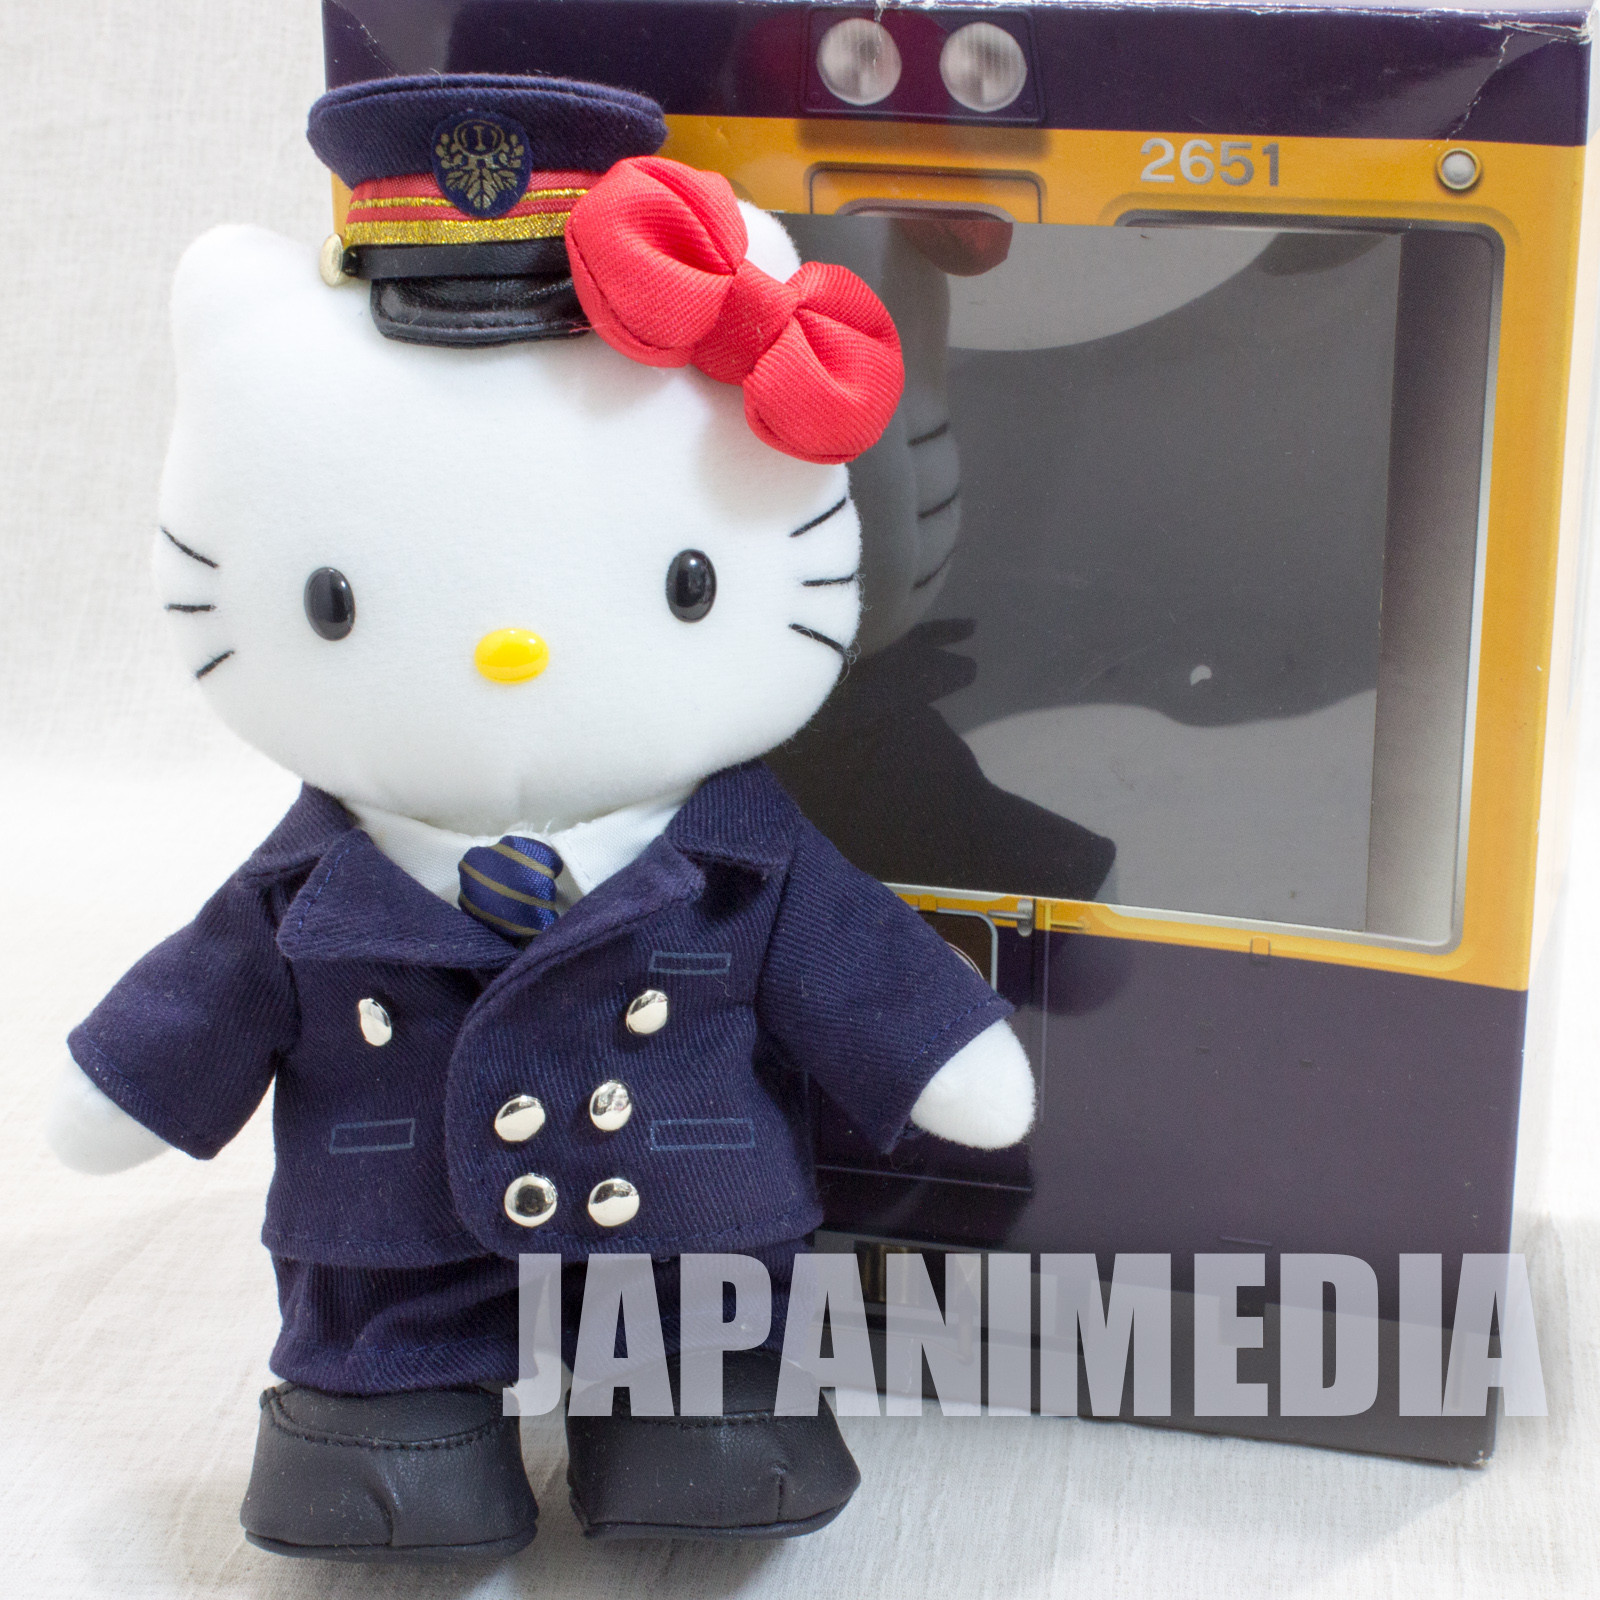  Hello Kitty Plush Toys for Kids, 4.5” Inch Stuffed